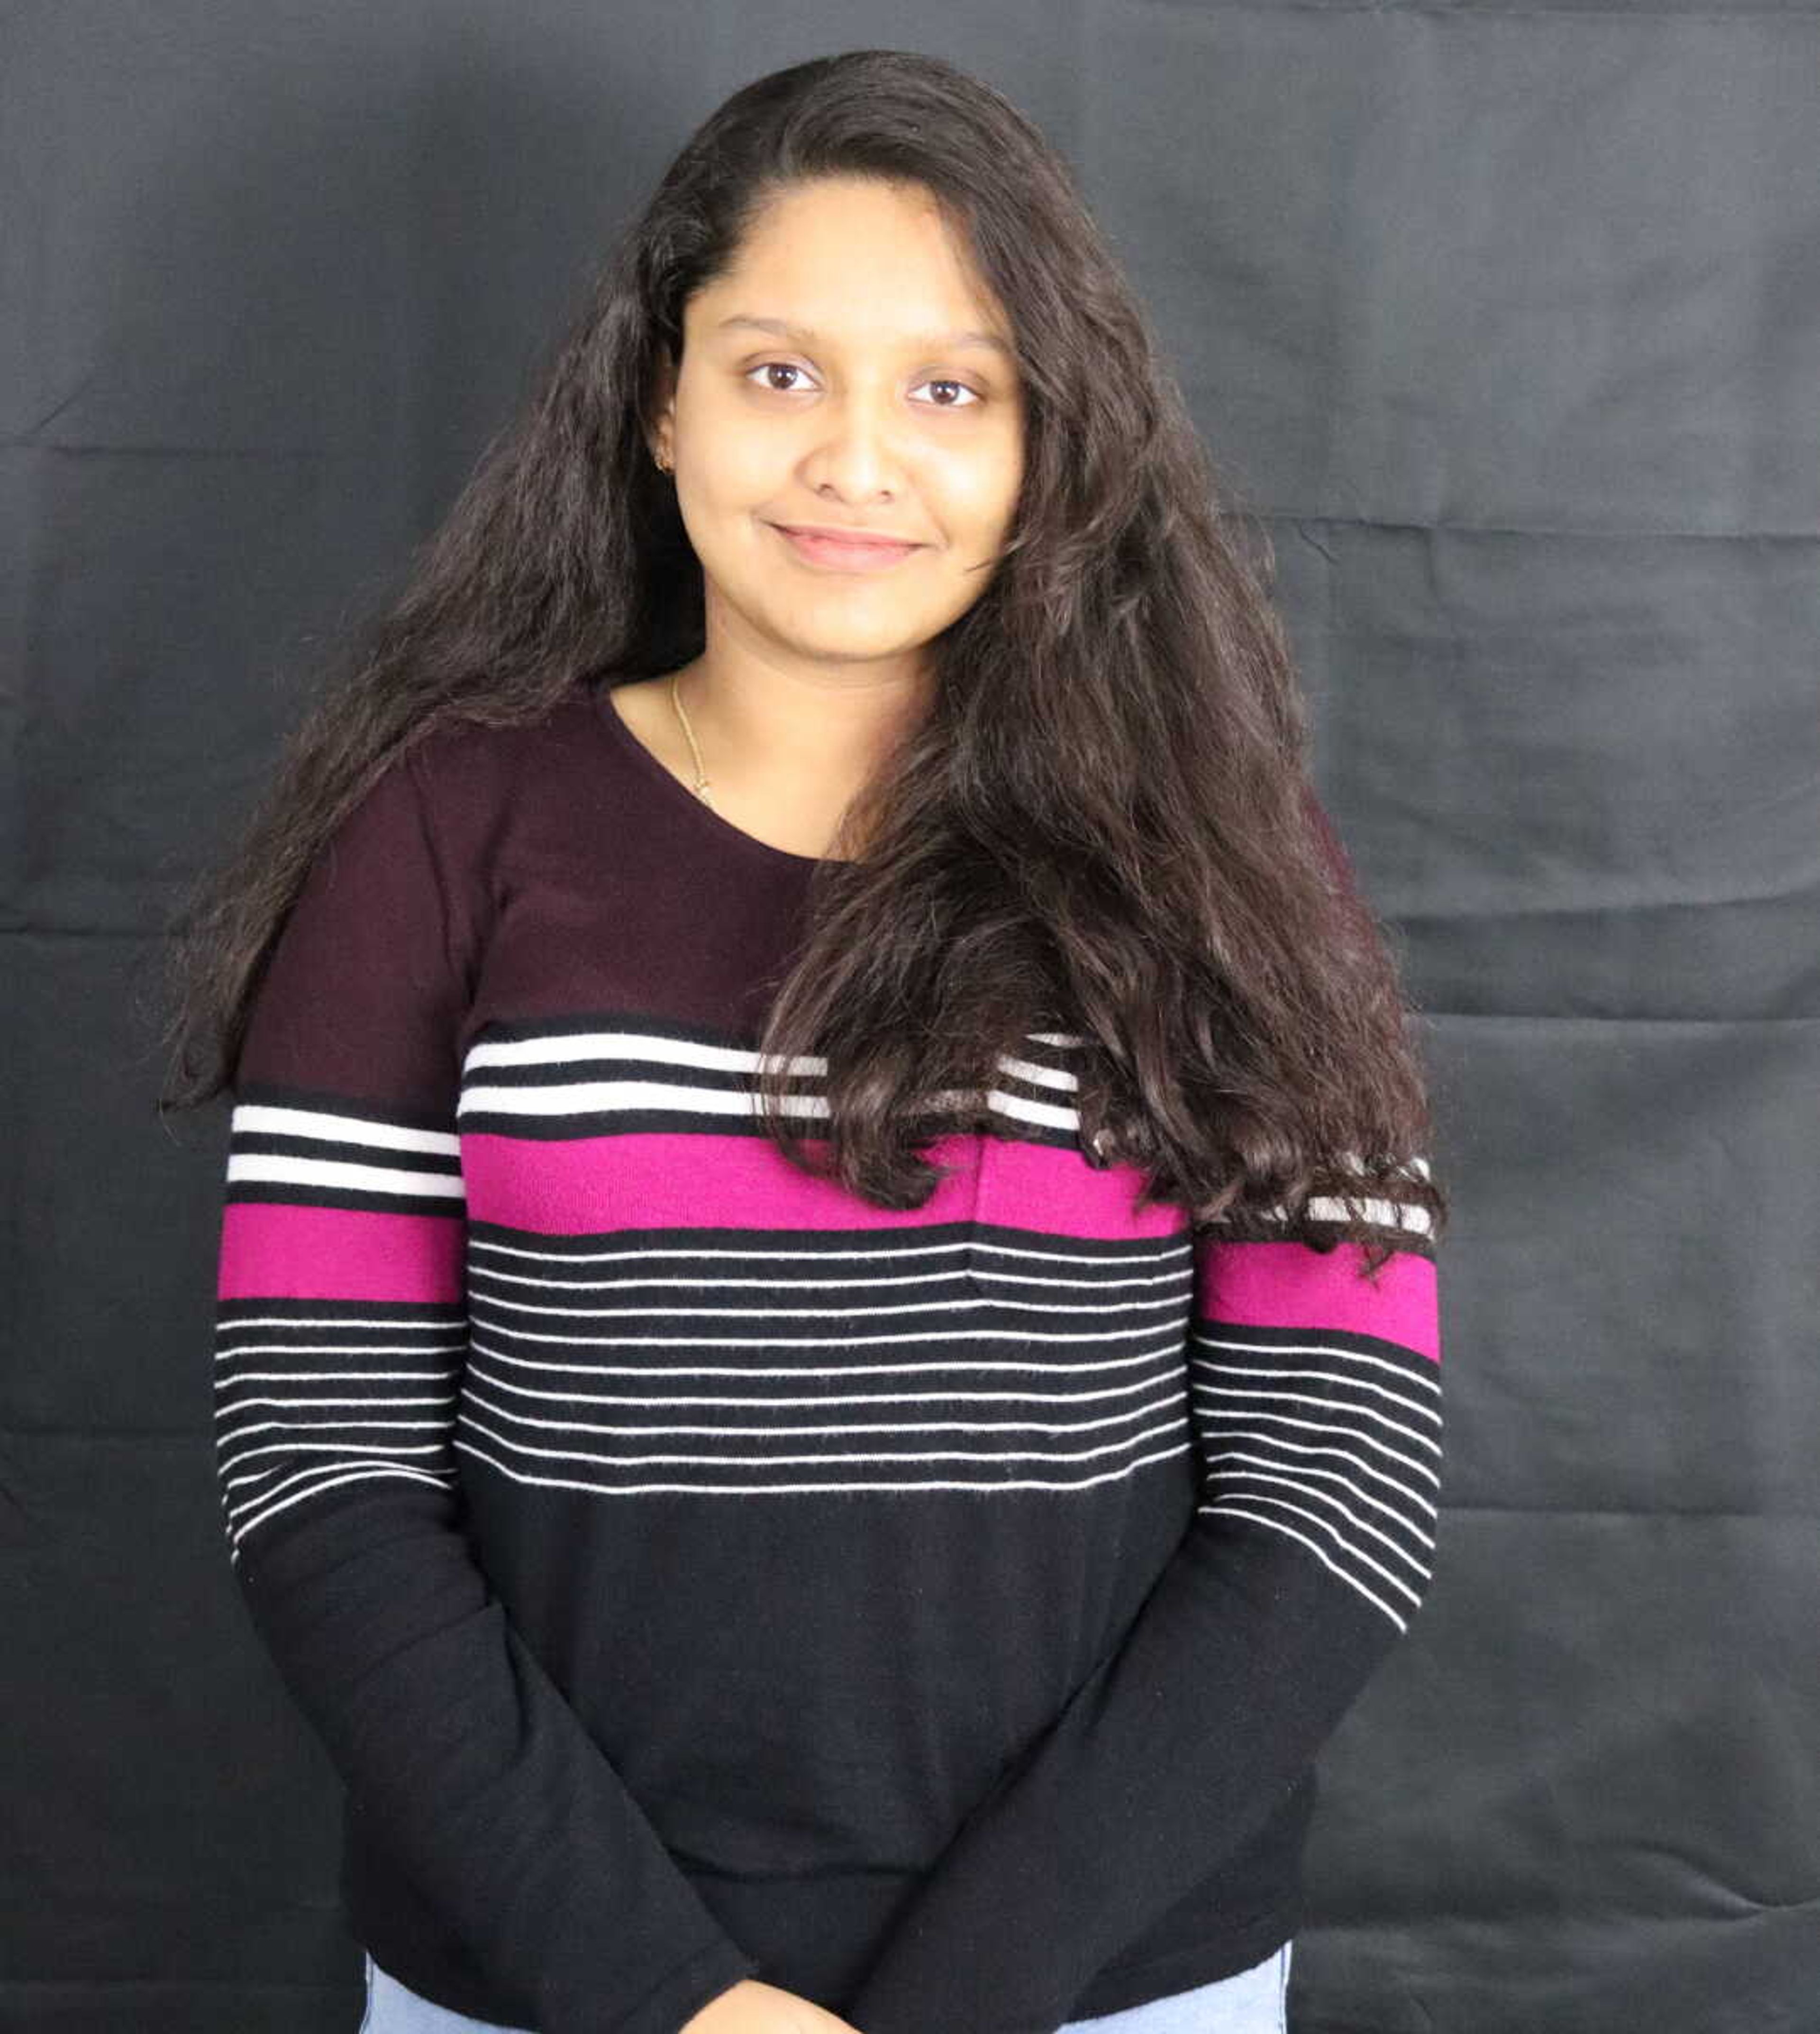 Lamia Khan is a student from Bangladesh, and she is currently studying elementary education.